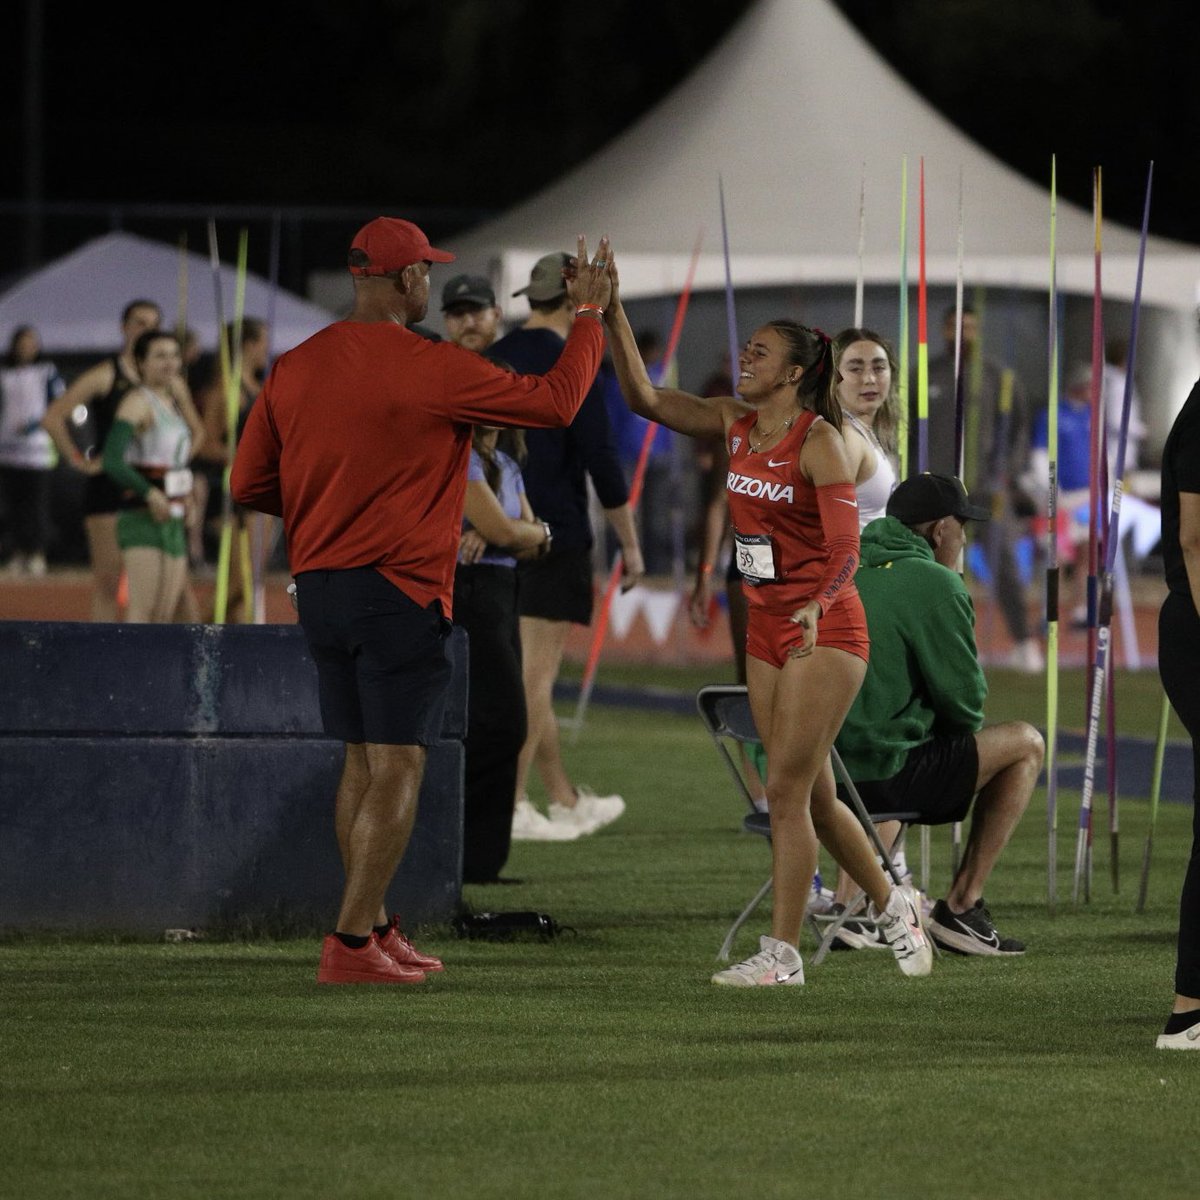 𝐉𝐀𝐕𝐄𝐋𝐈𝐍 𝐅𝐈𝐍𝐀𝐋 Aislin Martinez-Pompa posts a personal best throw of 151-1 (46.07m) to place fifth overall in the women’s javelin! #BearDown | #BeLezoLike